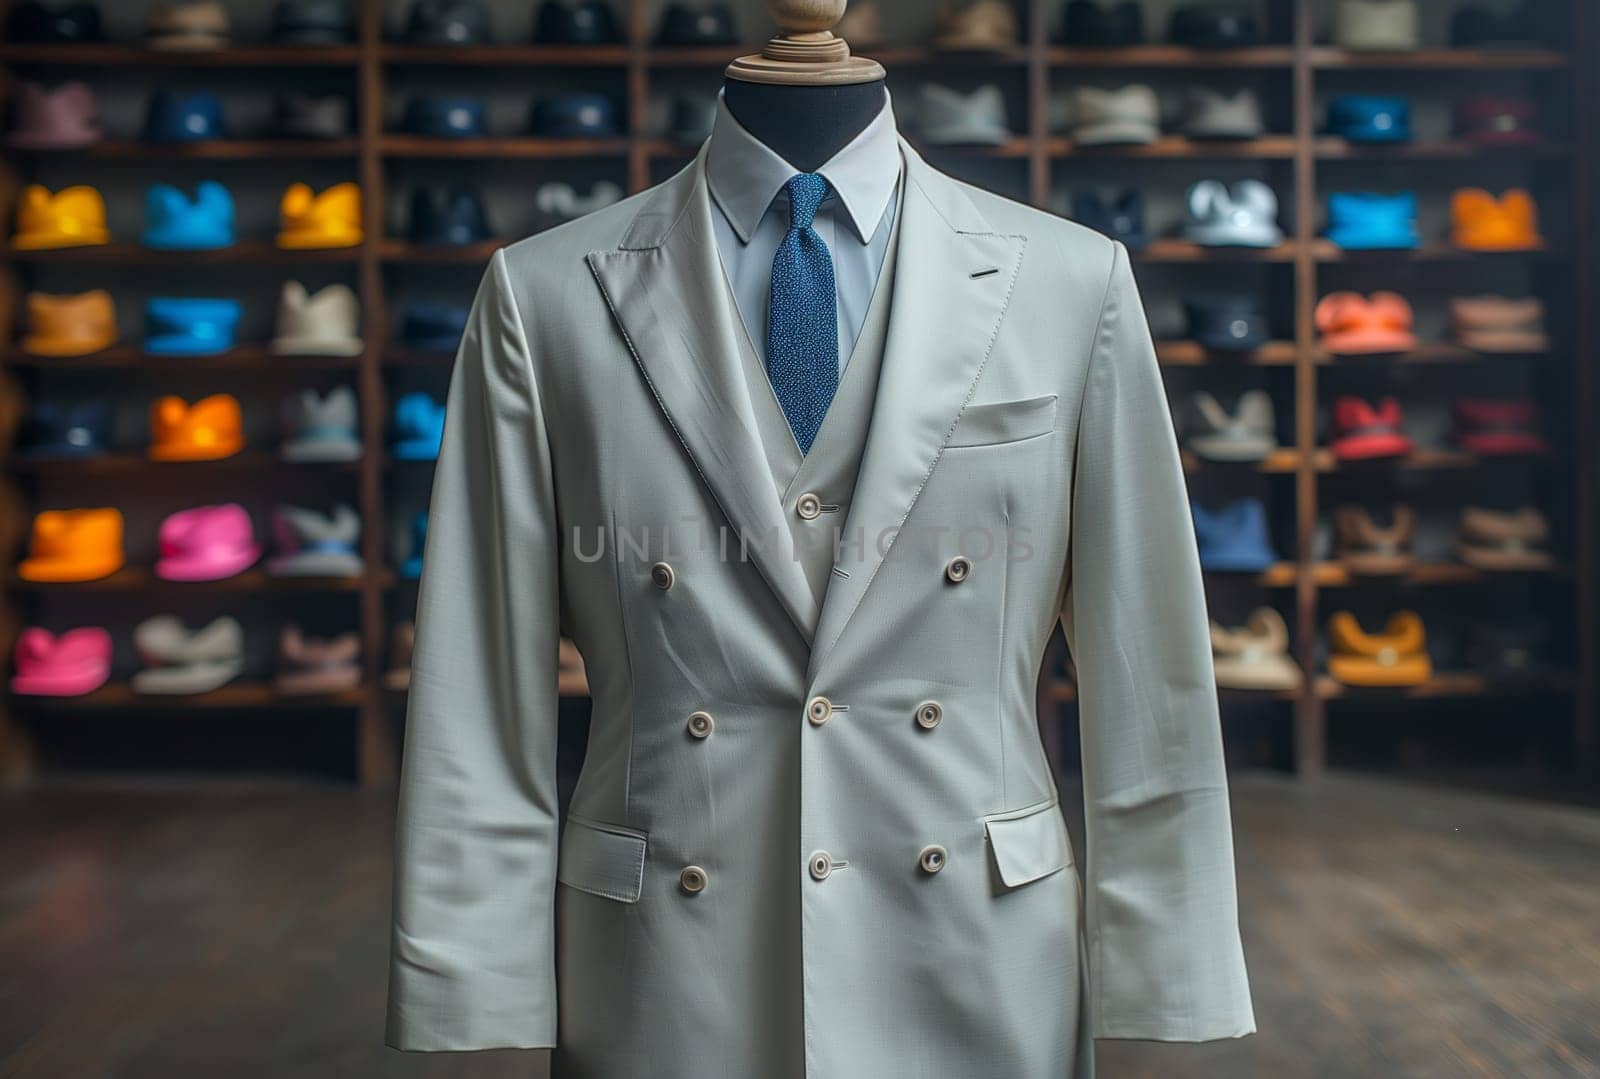 A white suit with tie displayed on a mannequin in the outerwear section of the store, featuring a dress shirt, coat, and hat on the shelf